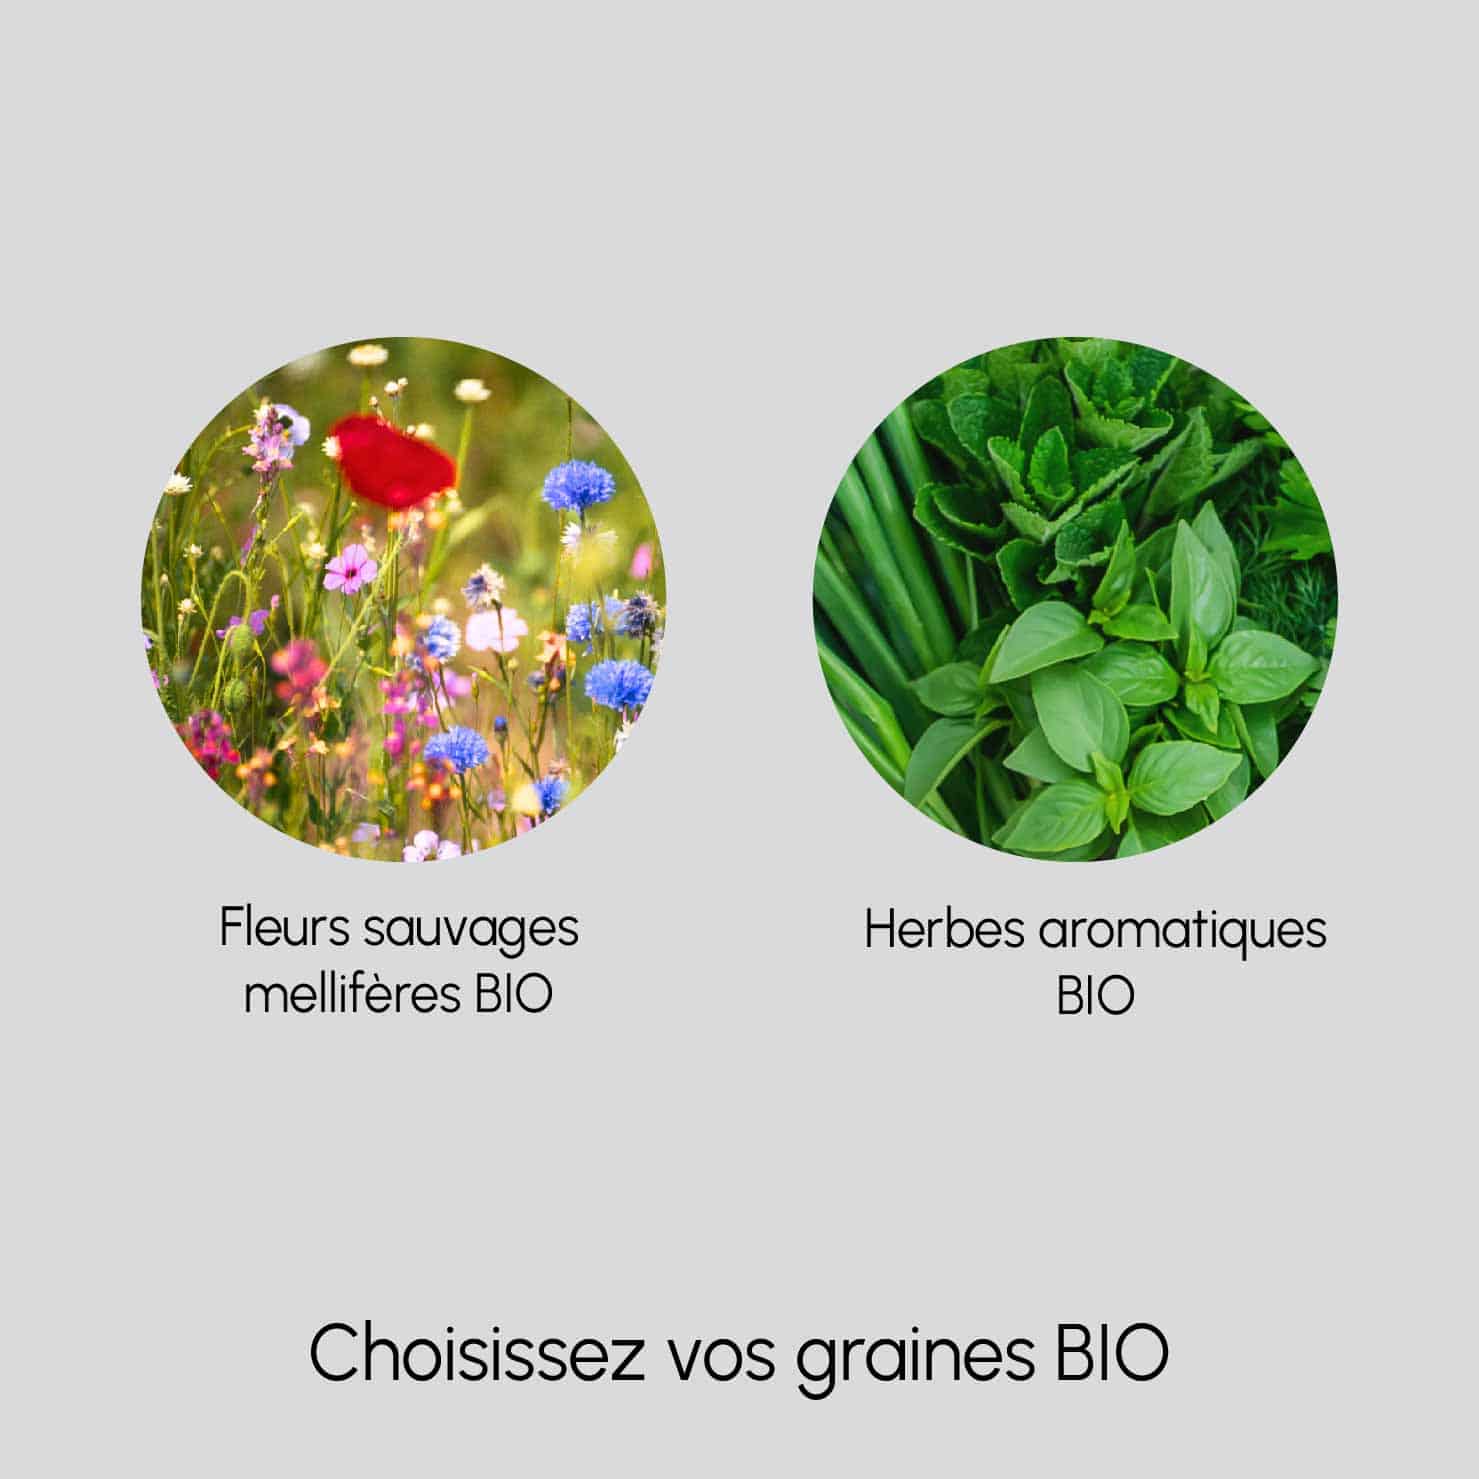 Choice of seeds - wild flowers or herbs